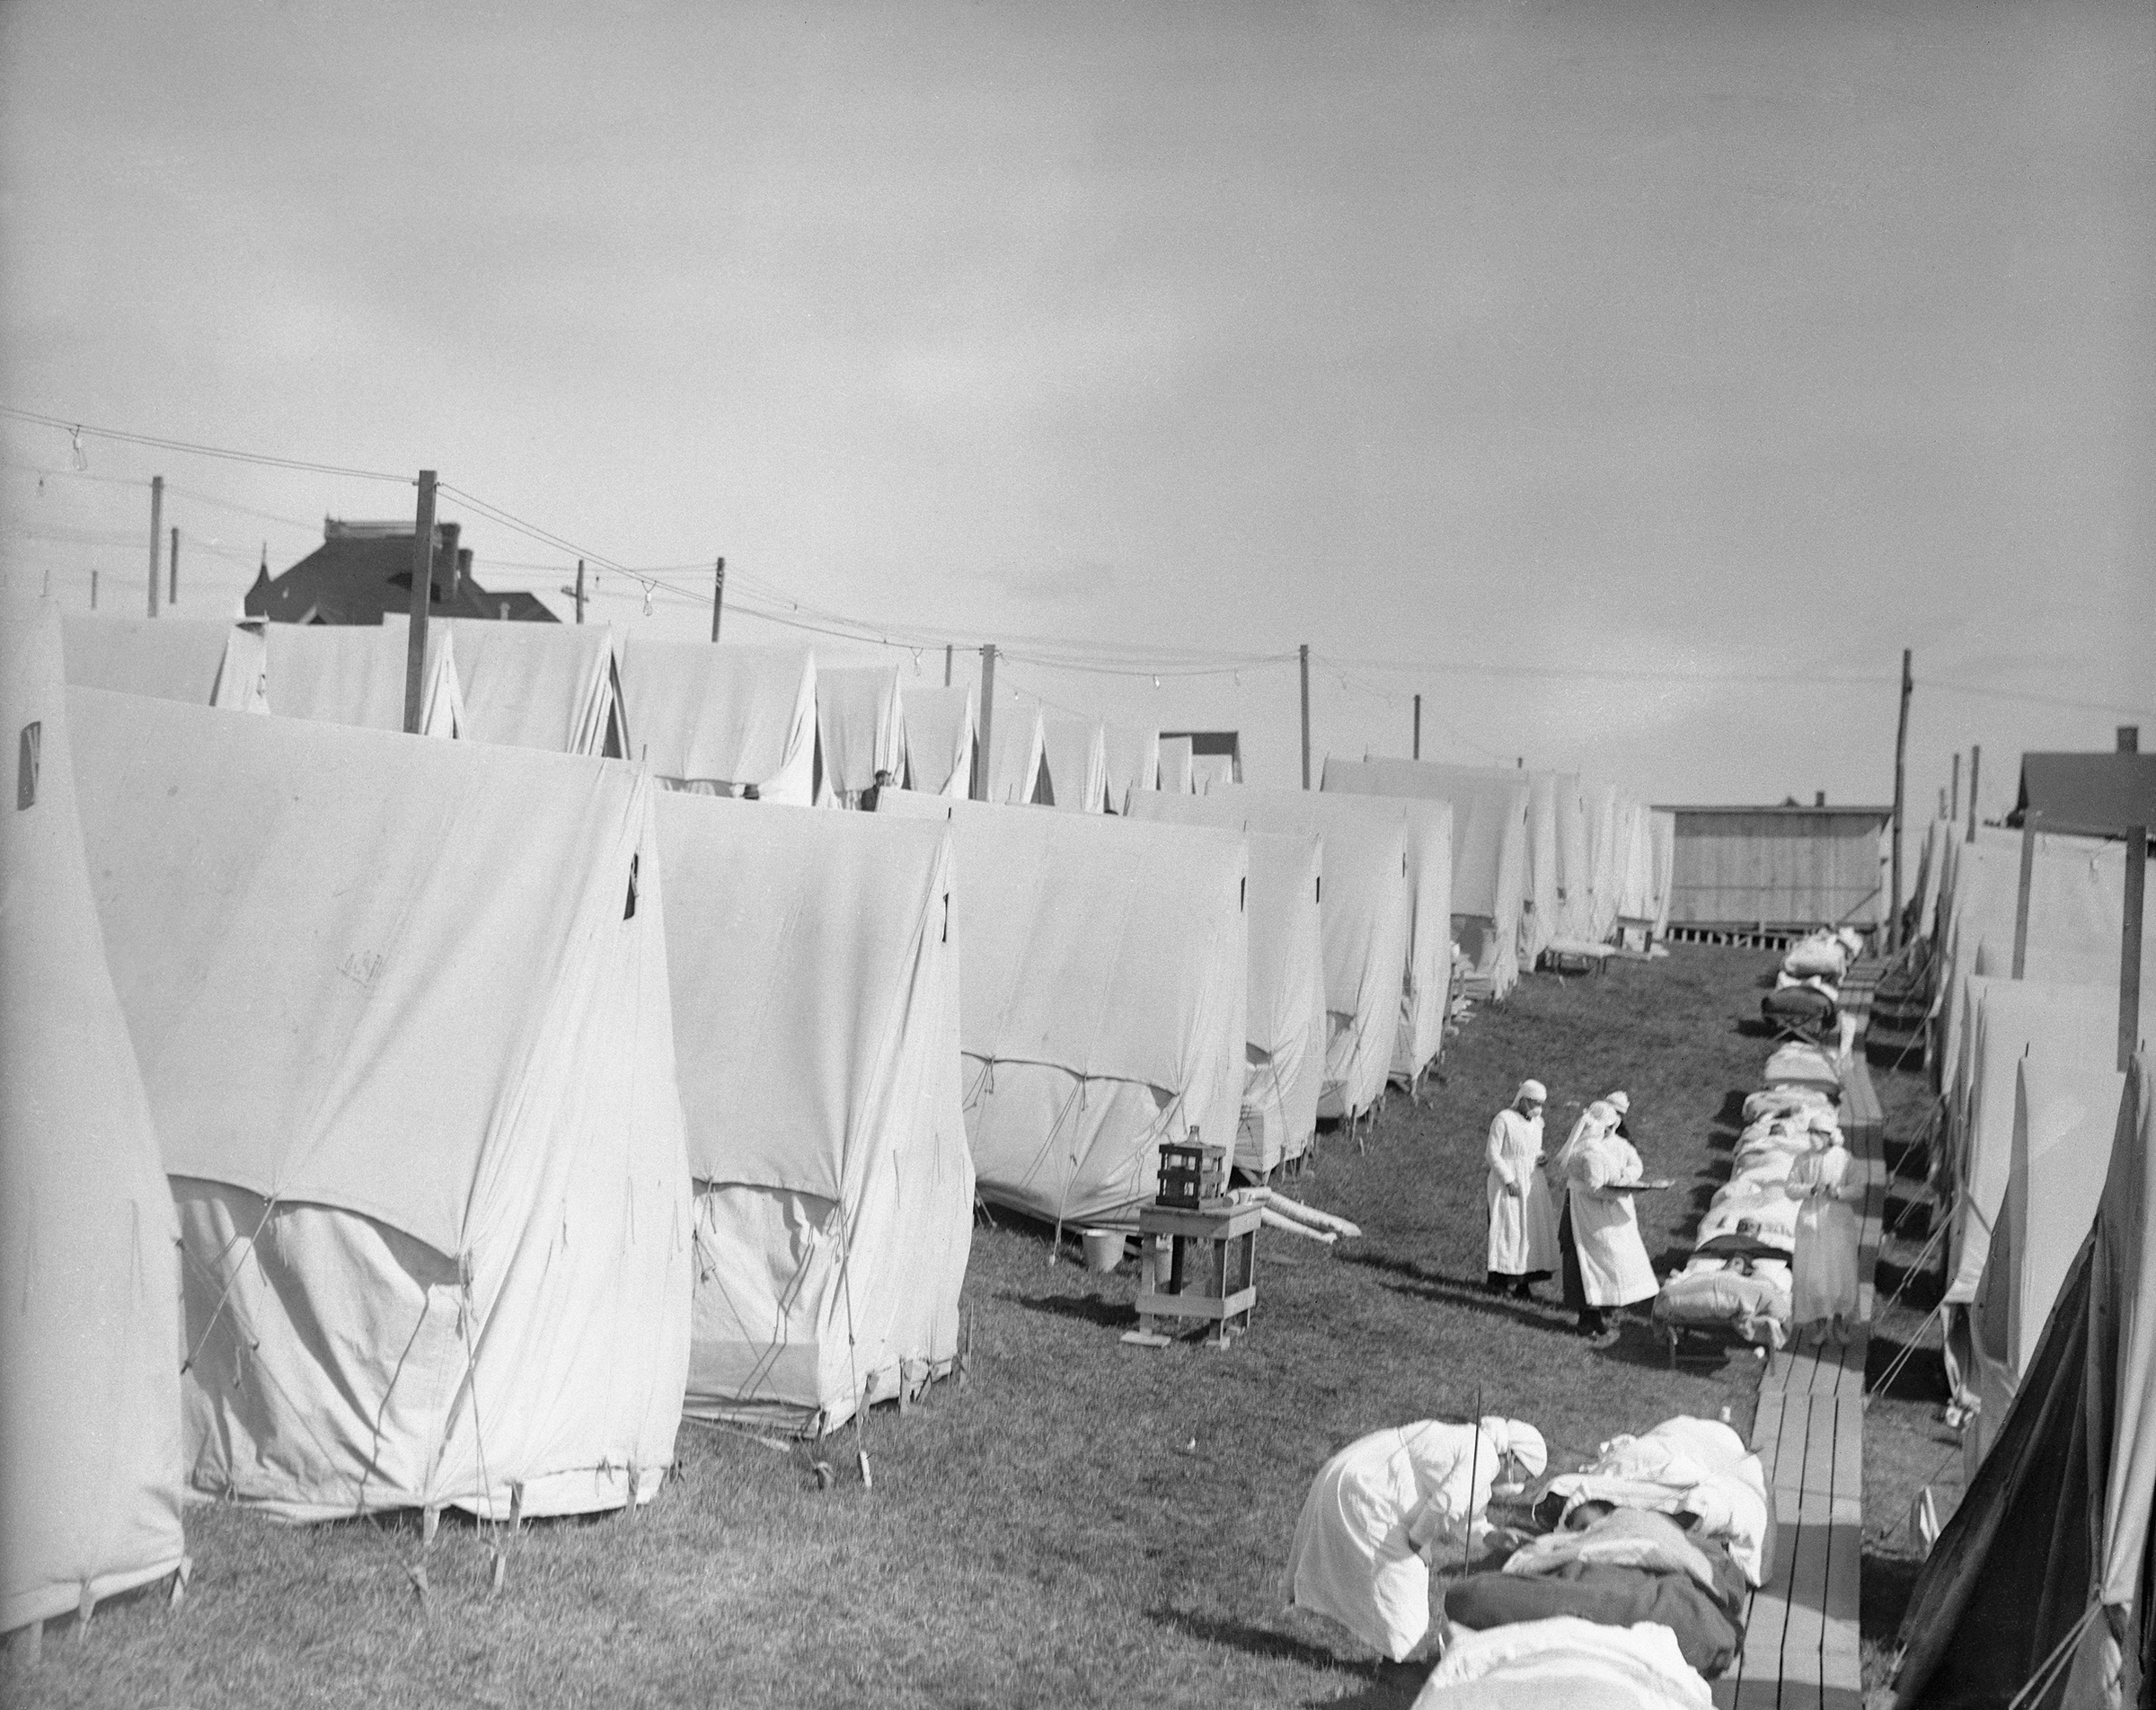 An influenza camp, where patients were given "fresh air treatment," in 1918. (Bettmann Archive/Getty Images)